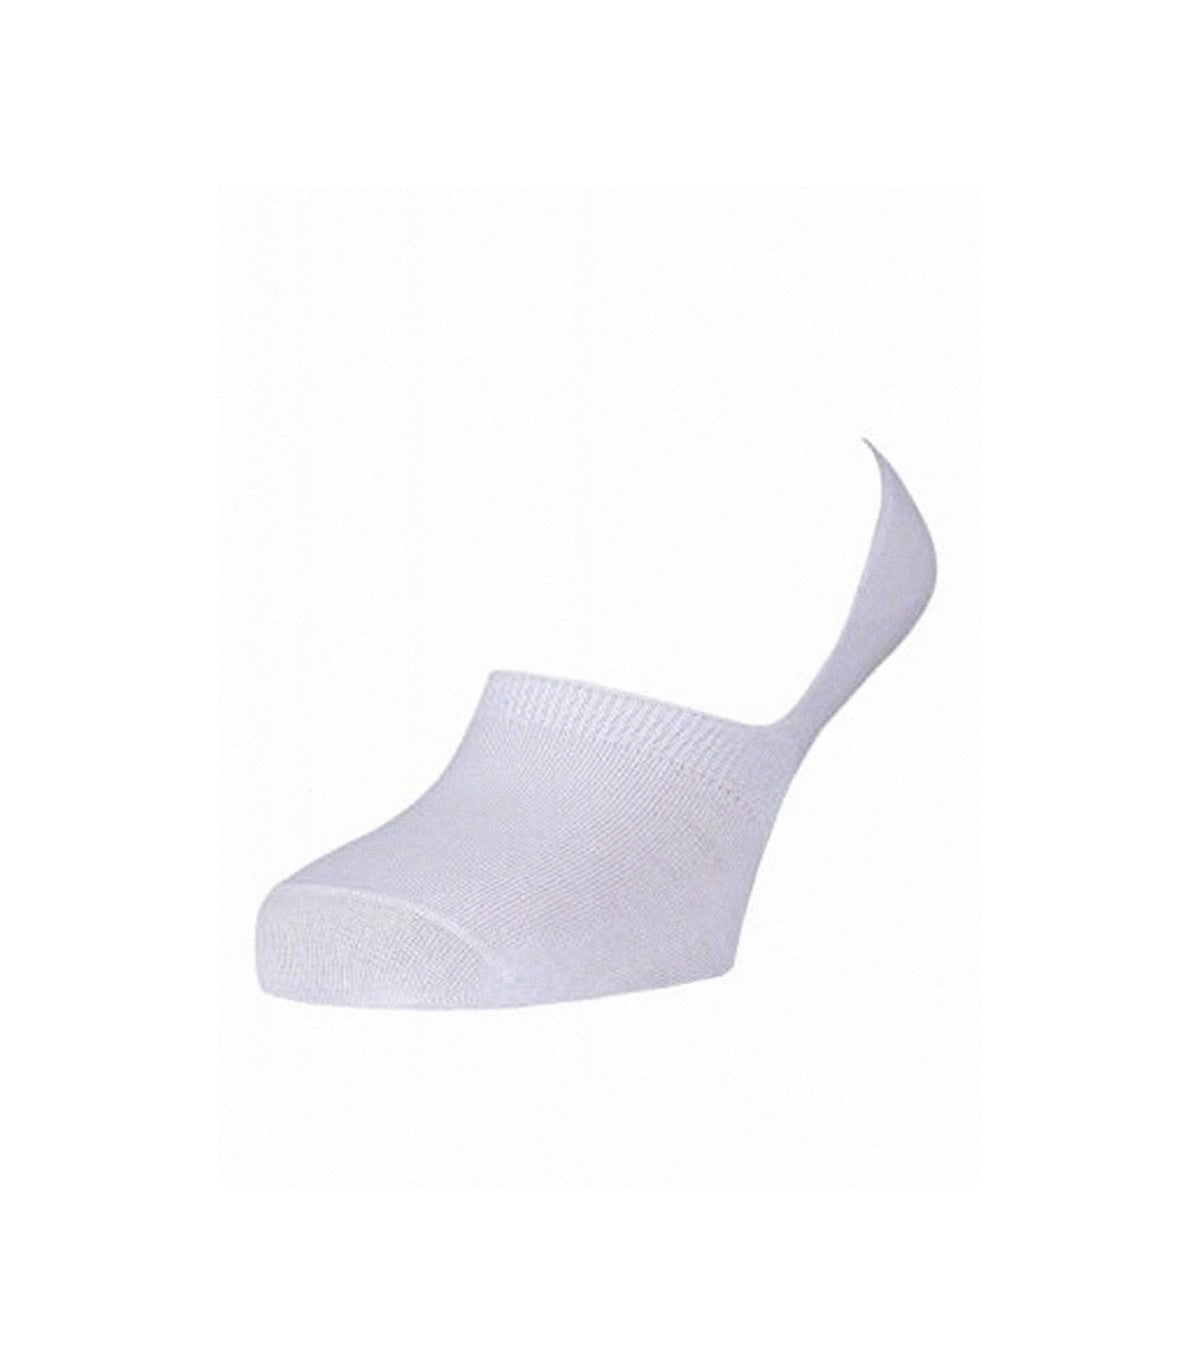 Ysabel Mora 17390 Pinki Invisible Footsies - Plain cotton sports shoe liners with flat toe seams, elasticated panel around the foot and silicone gripper strips on the heel. Available in men and women's sizes in black and white.